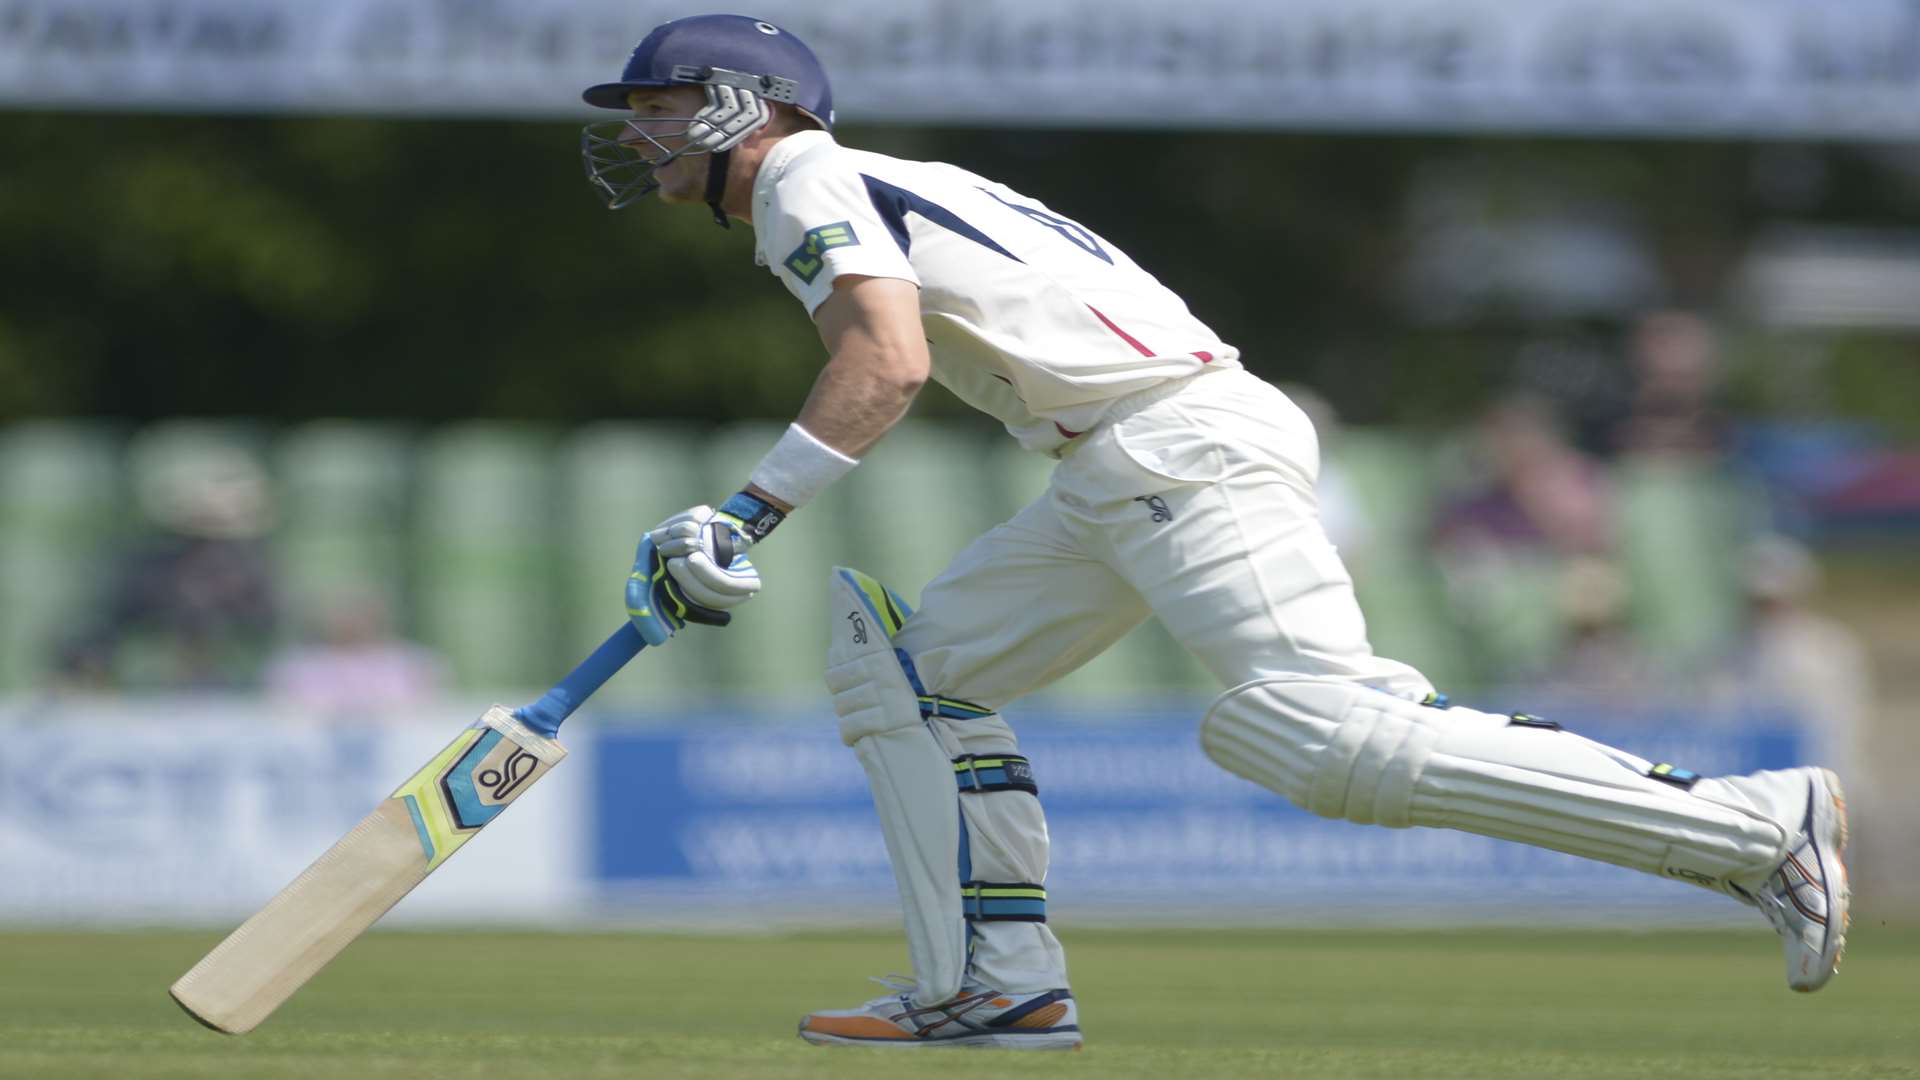 Joe Denly top-scored with 39 in Kent's second innings against Northamptonshire